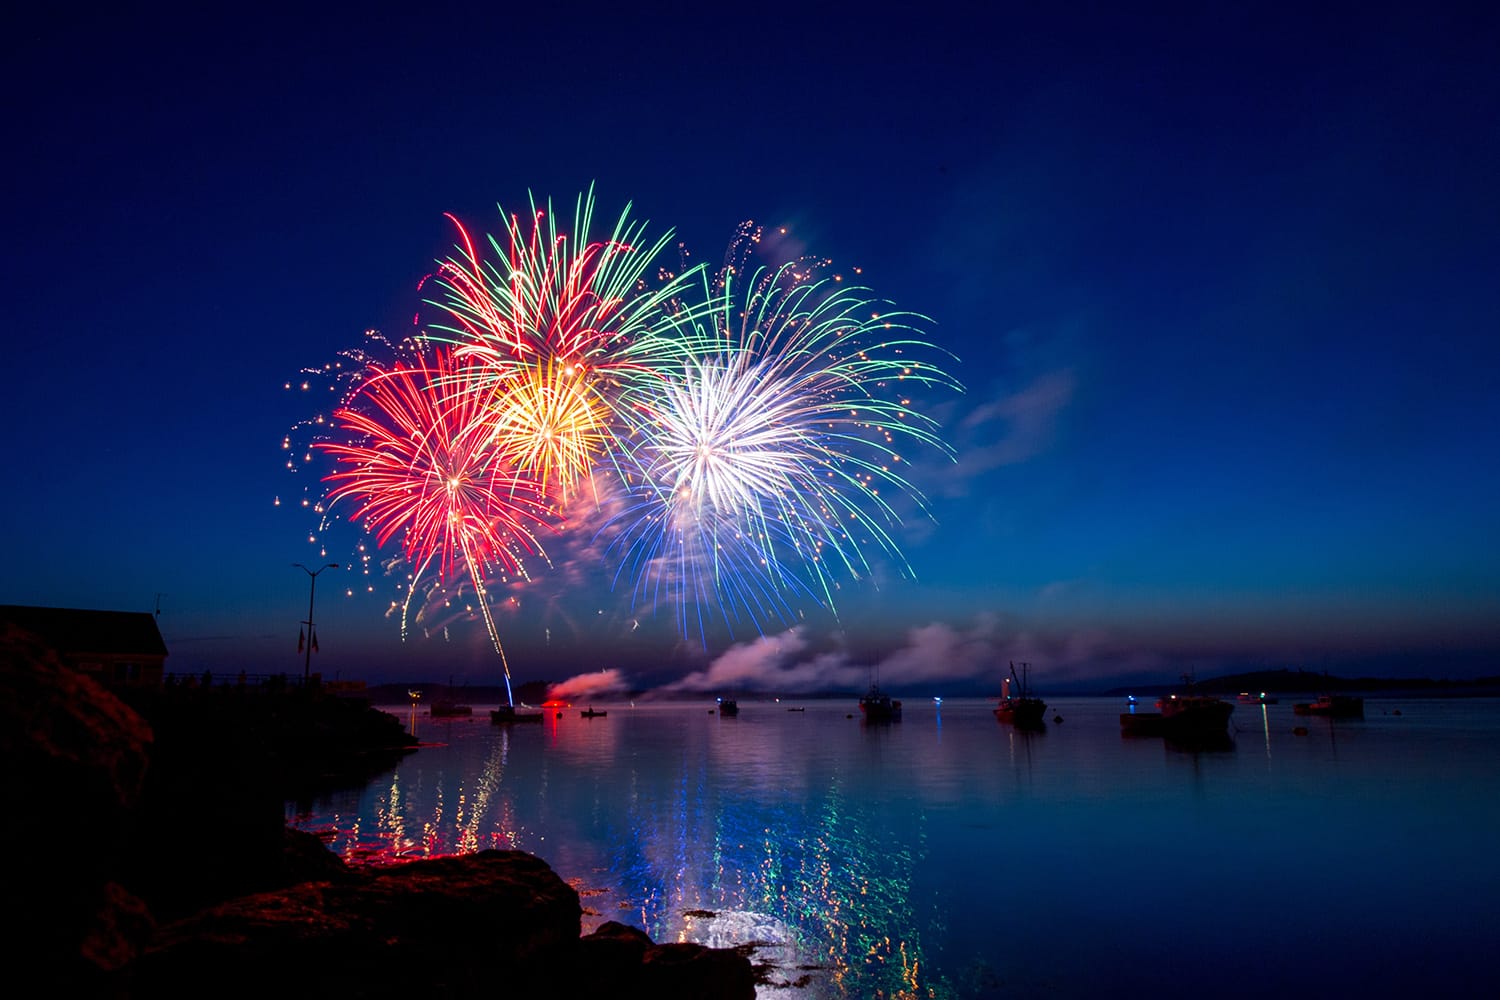 The Ultimate Guide to Photographing Fireworks